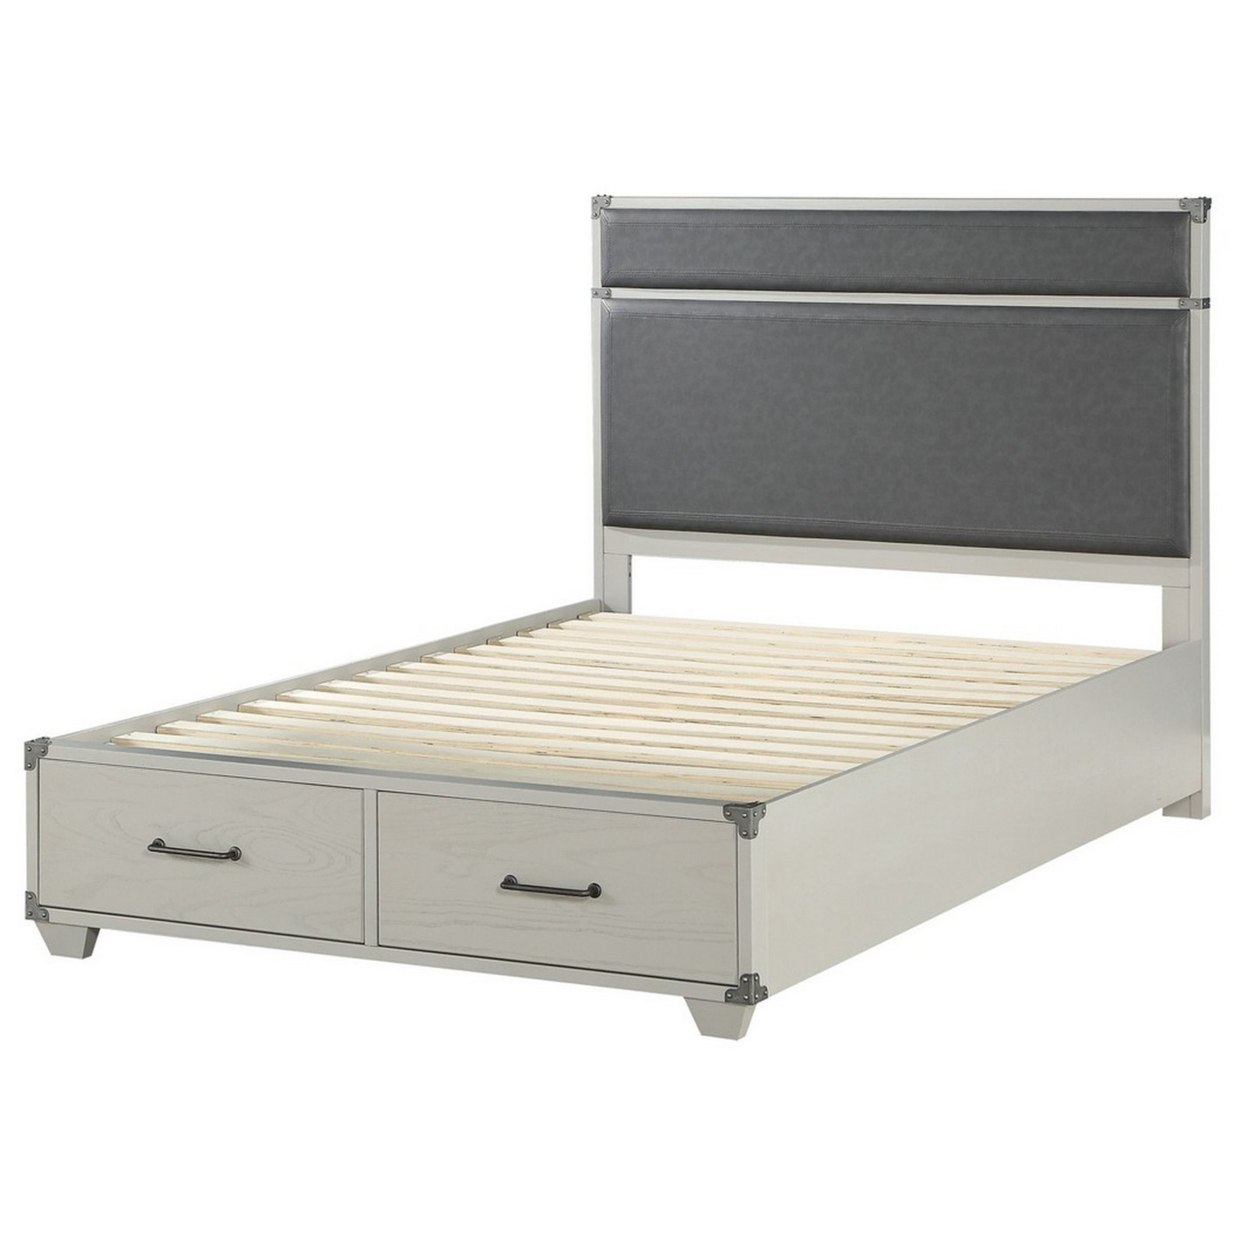 Wooden Twin Bed With 2 Storage Drawers, White And Gray- Saltoro Sherpi